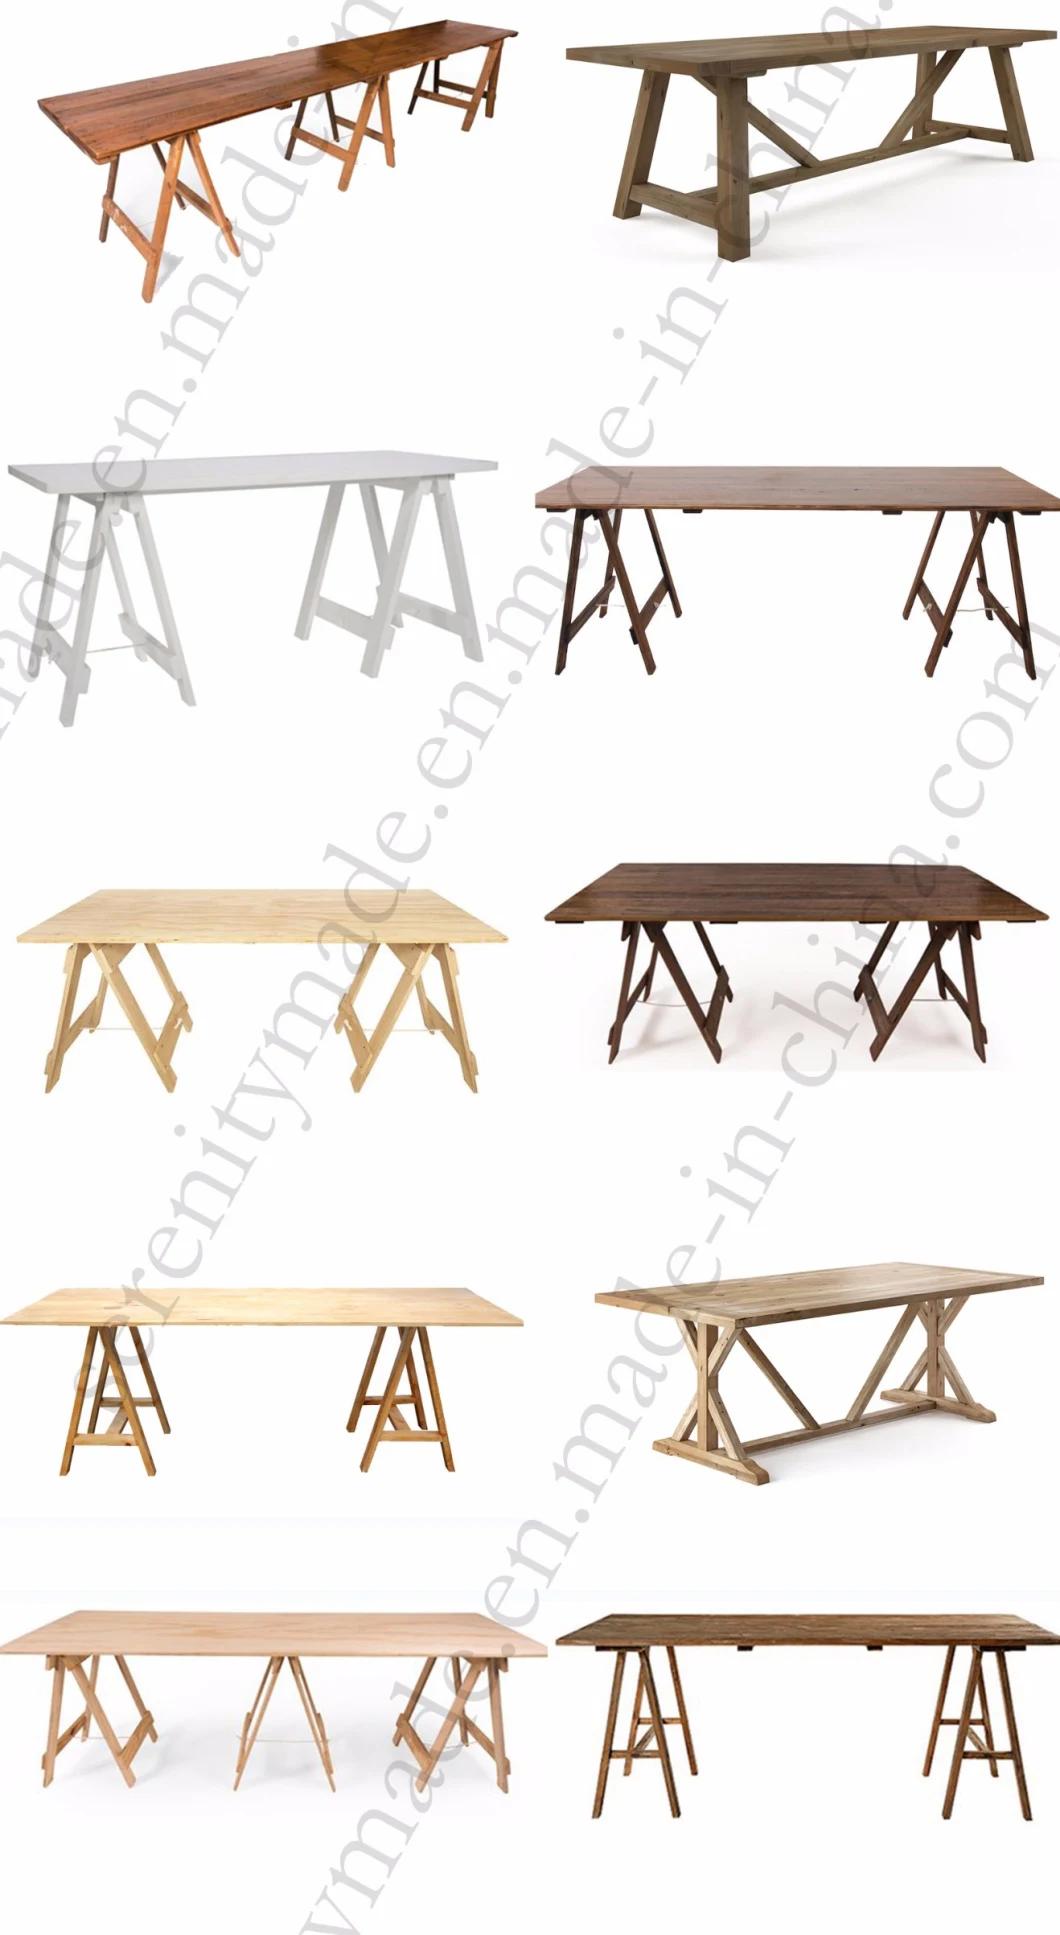 Rustic Style Wooden Trestle Dining Table for Restaurant Use